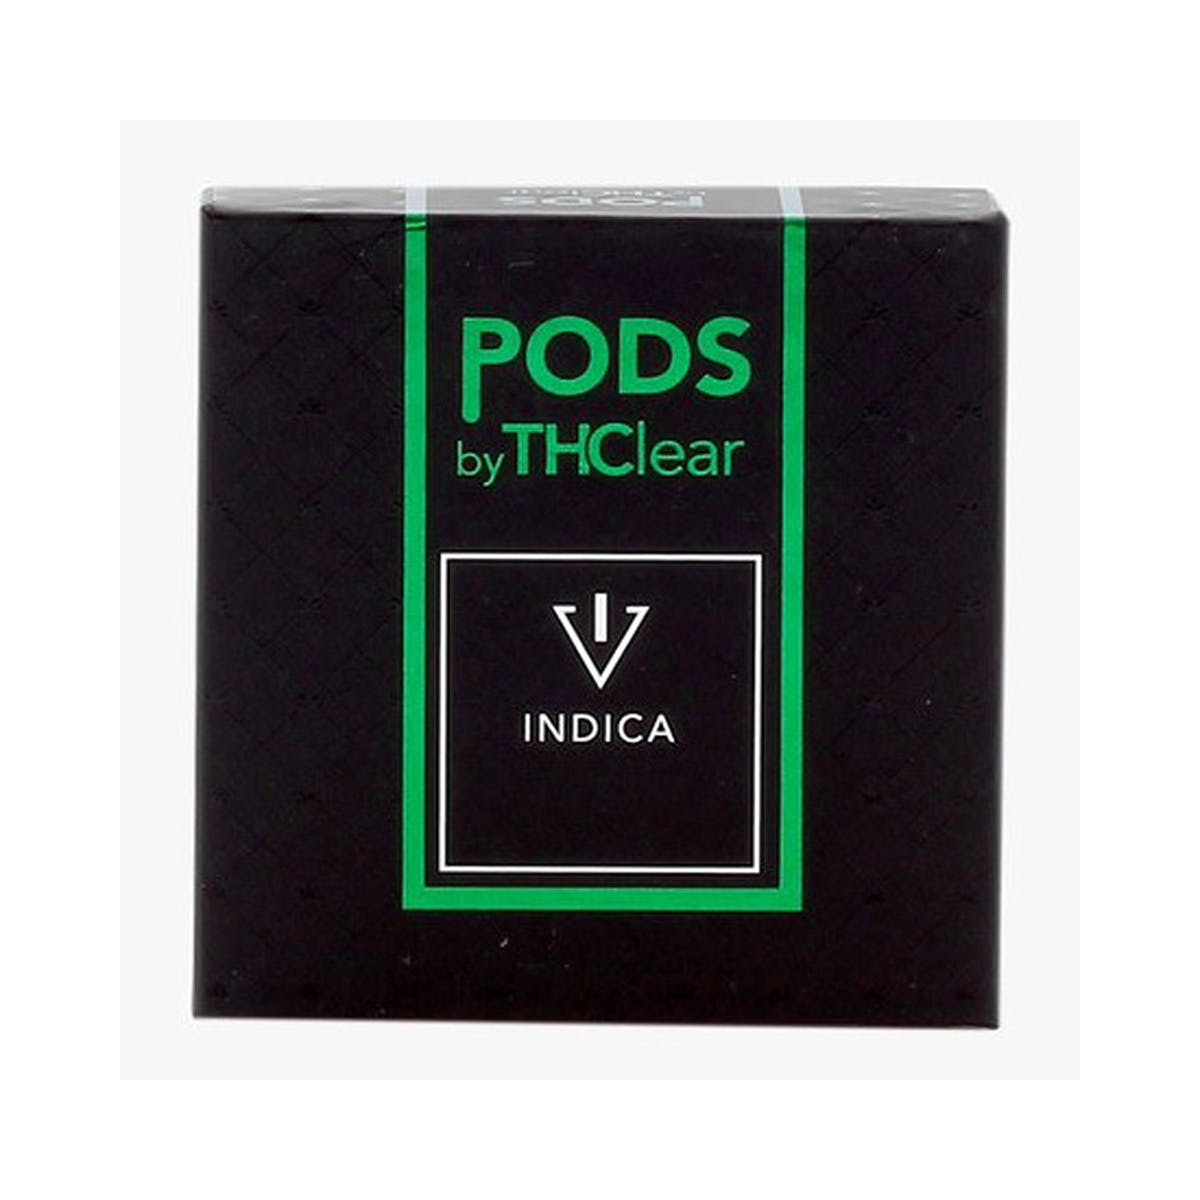 Indica PODS by THClear